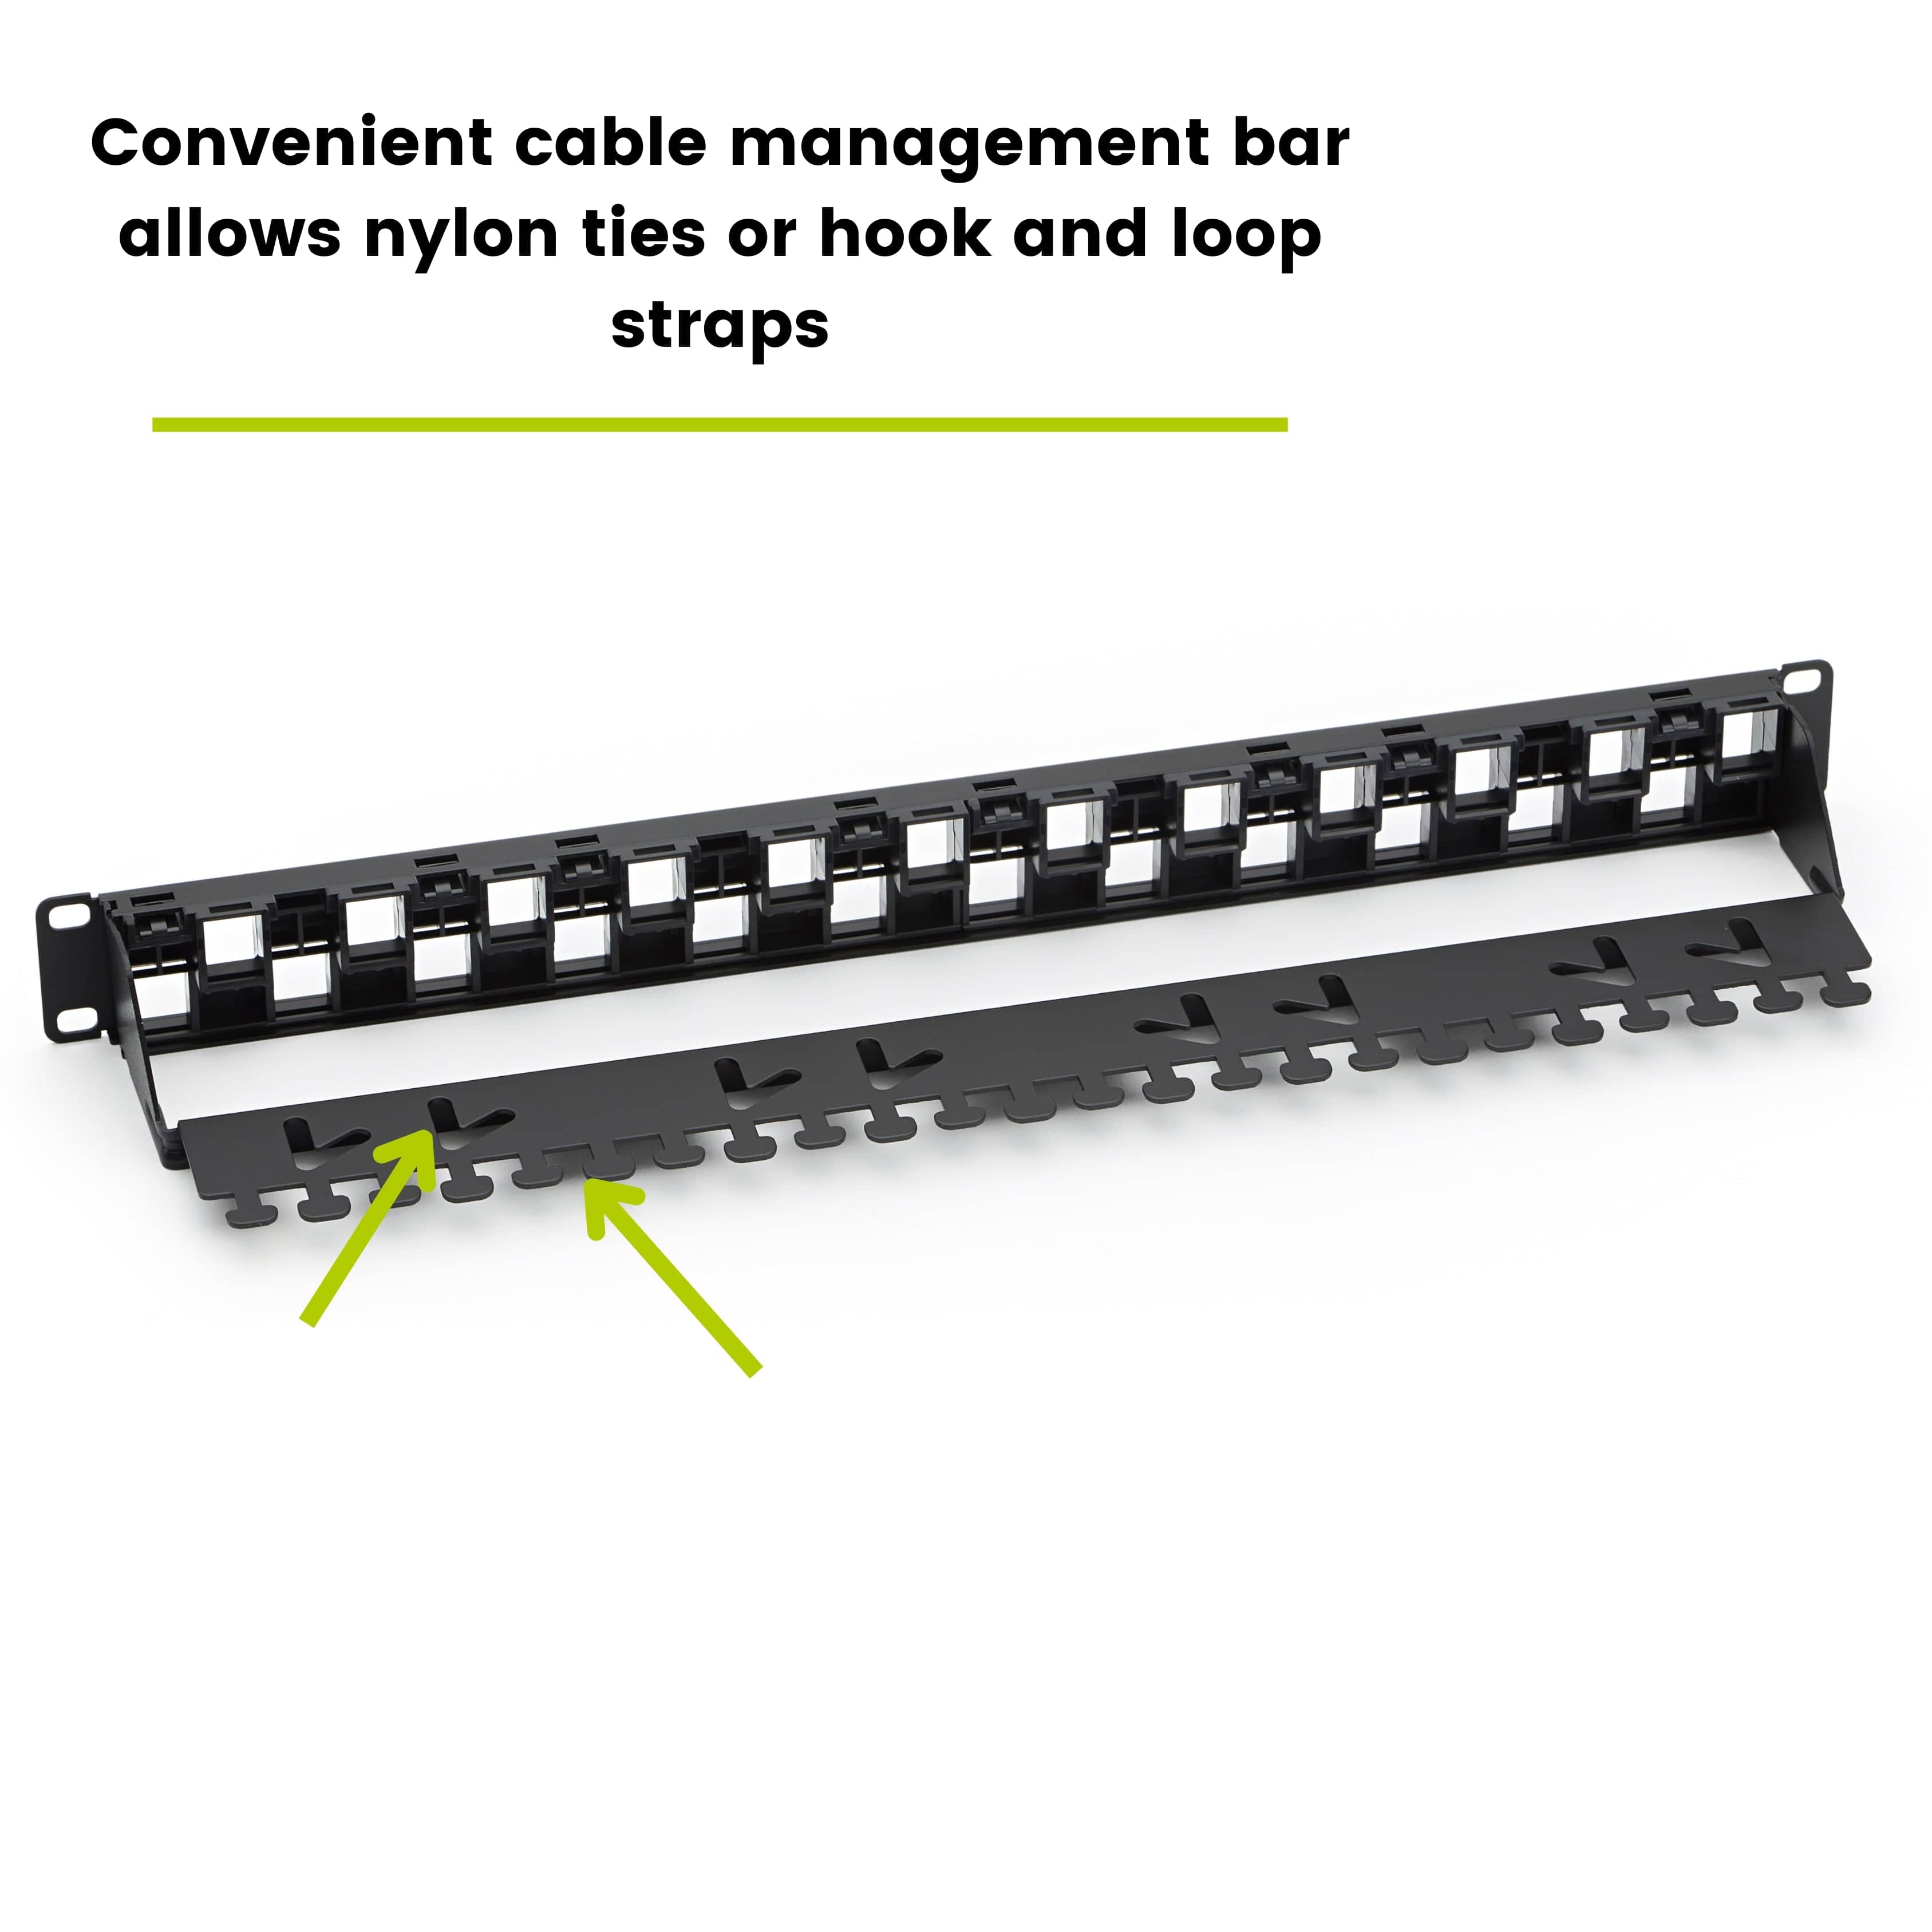 Unshielded Patch Panel, 24 Port, 1U, Staggered Blank Modular